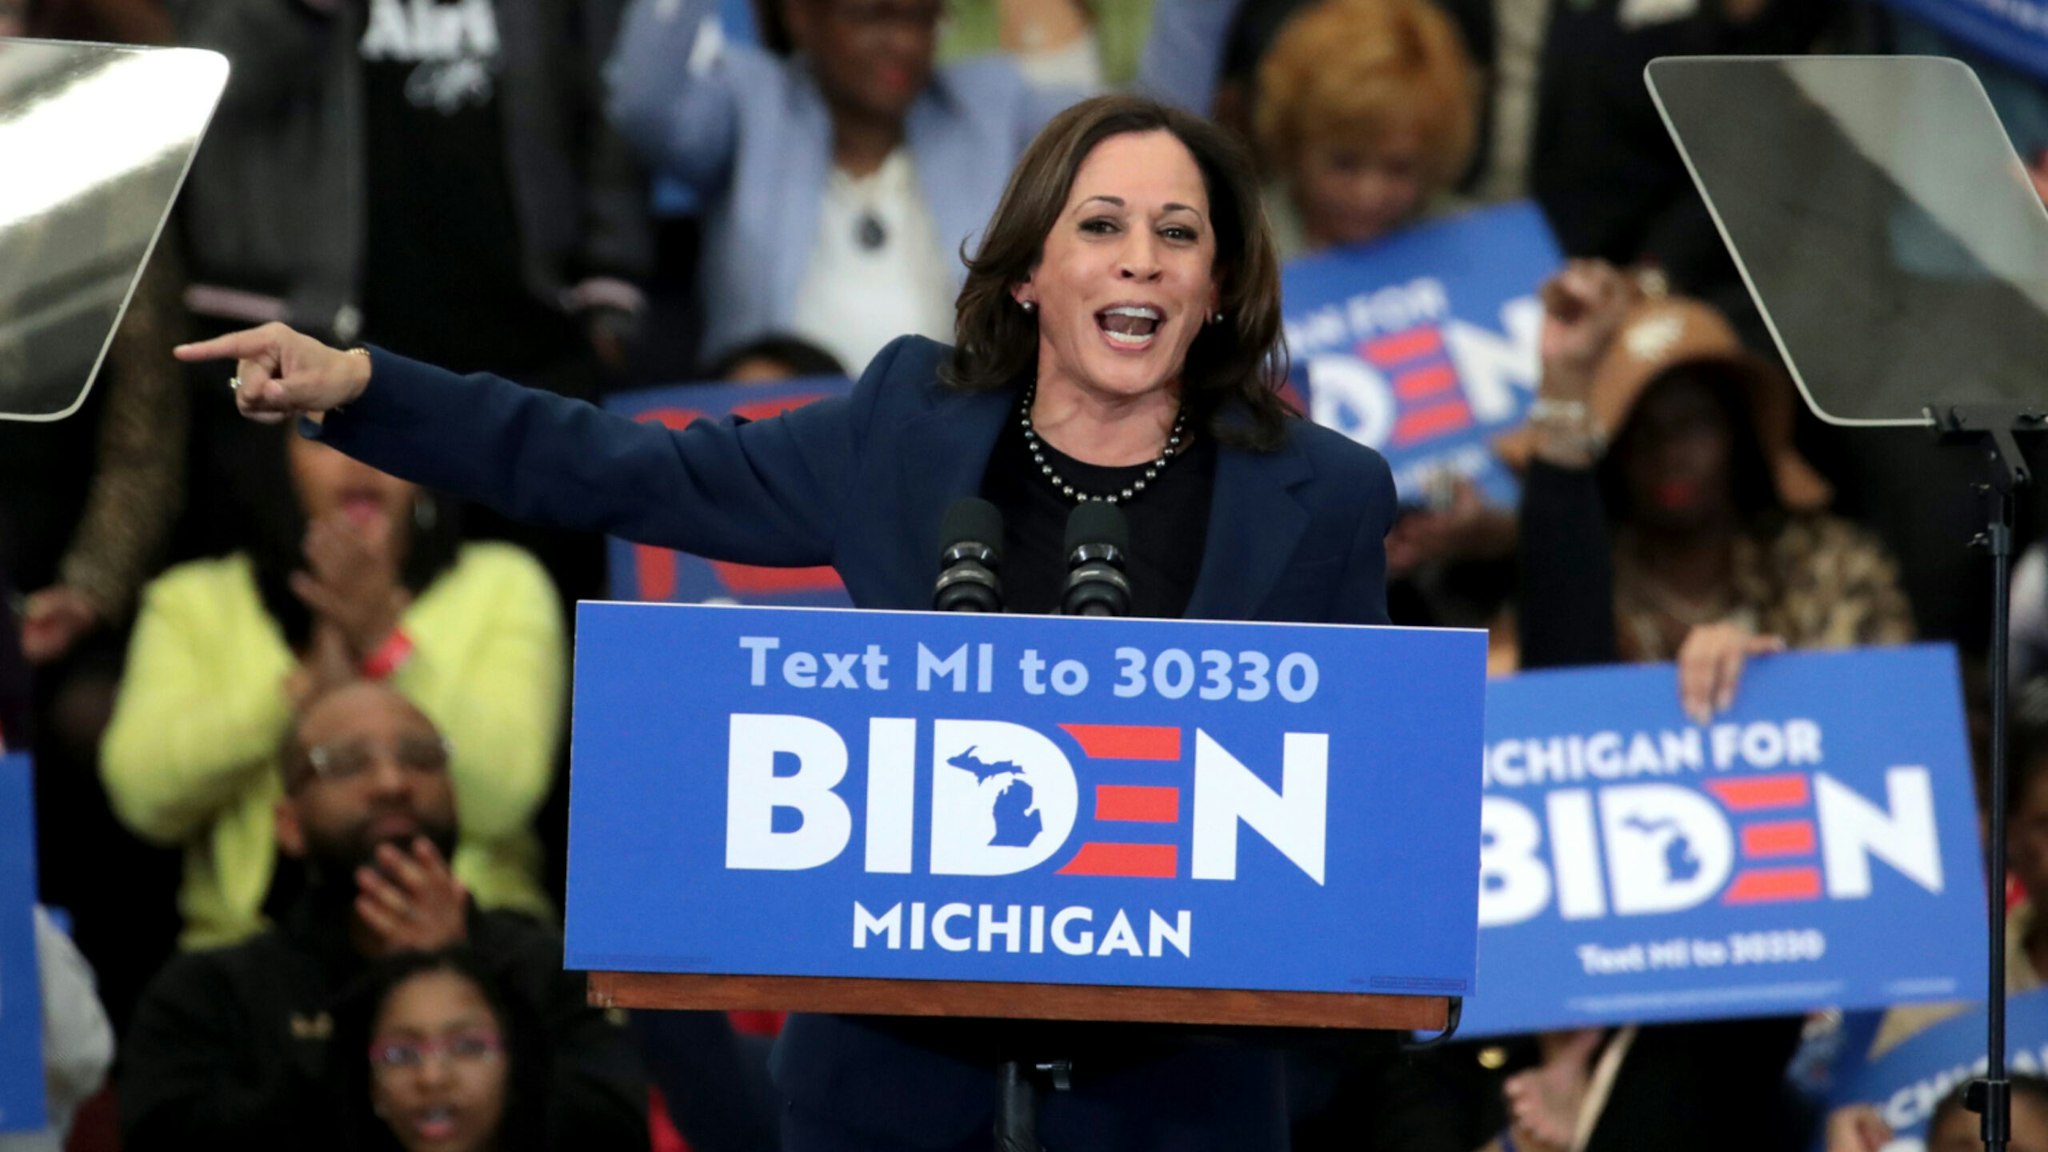 Sen. Kamala Harris (D-CA) introduces Democratic presidential candidate former Vice President Joe Biden at a campaign rally at Renaissance High School on March 09, 2020 in Detroit, Michigan.